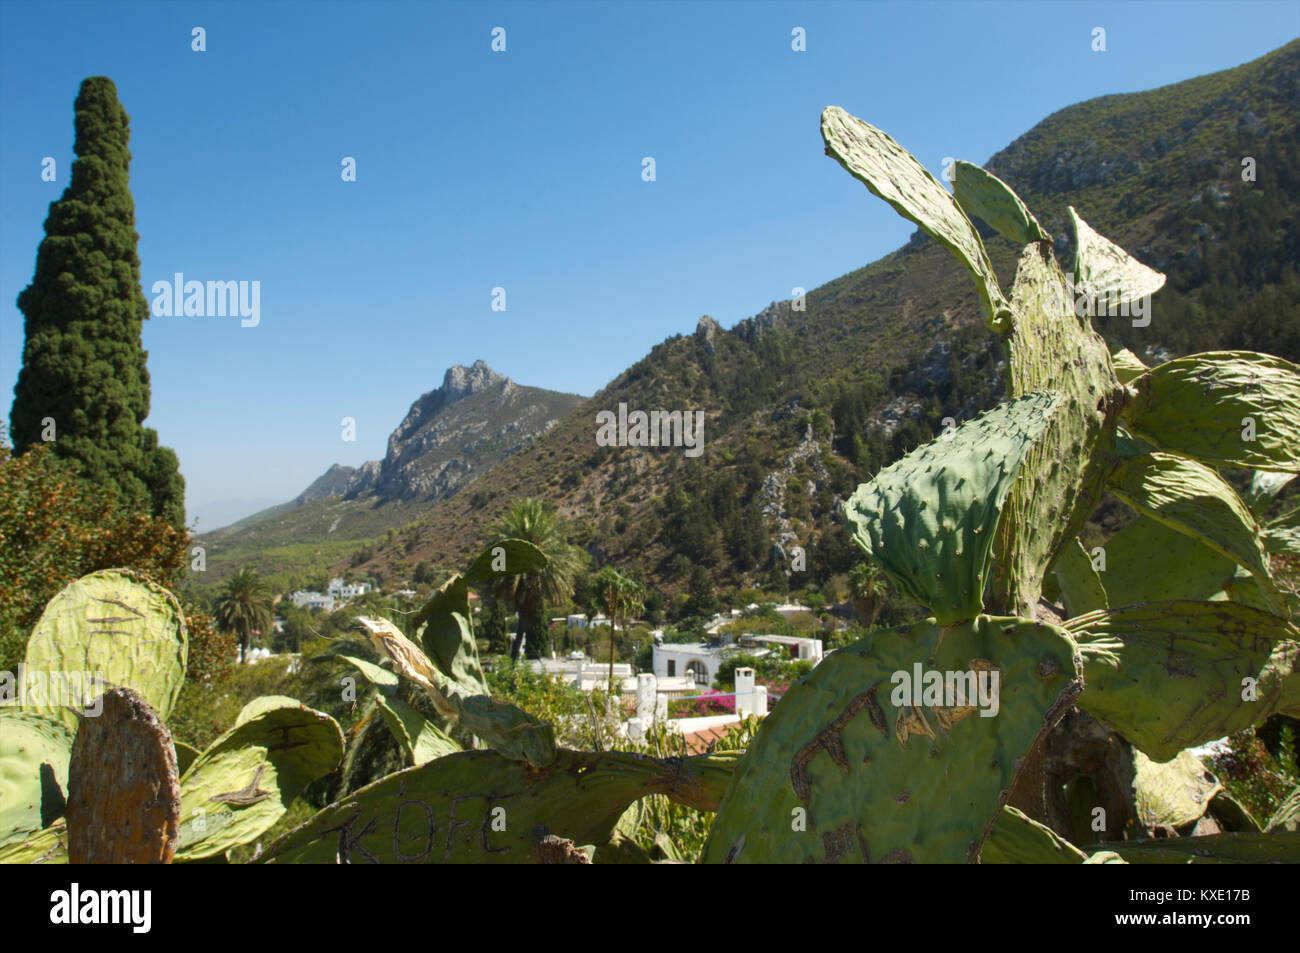 Graffiti on cactus plants in the village of Karmi with the mountains in the background, Cyprus Stock Photo